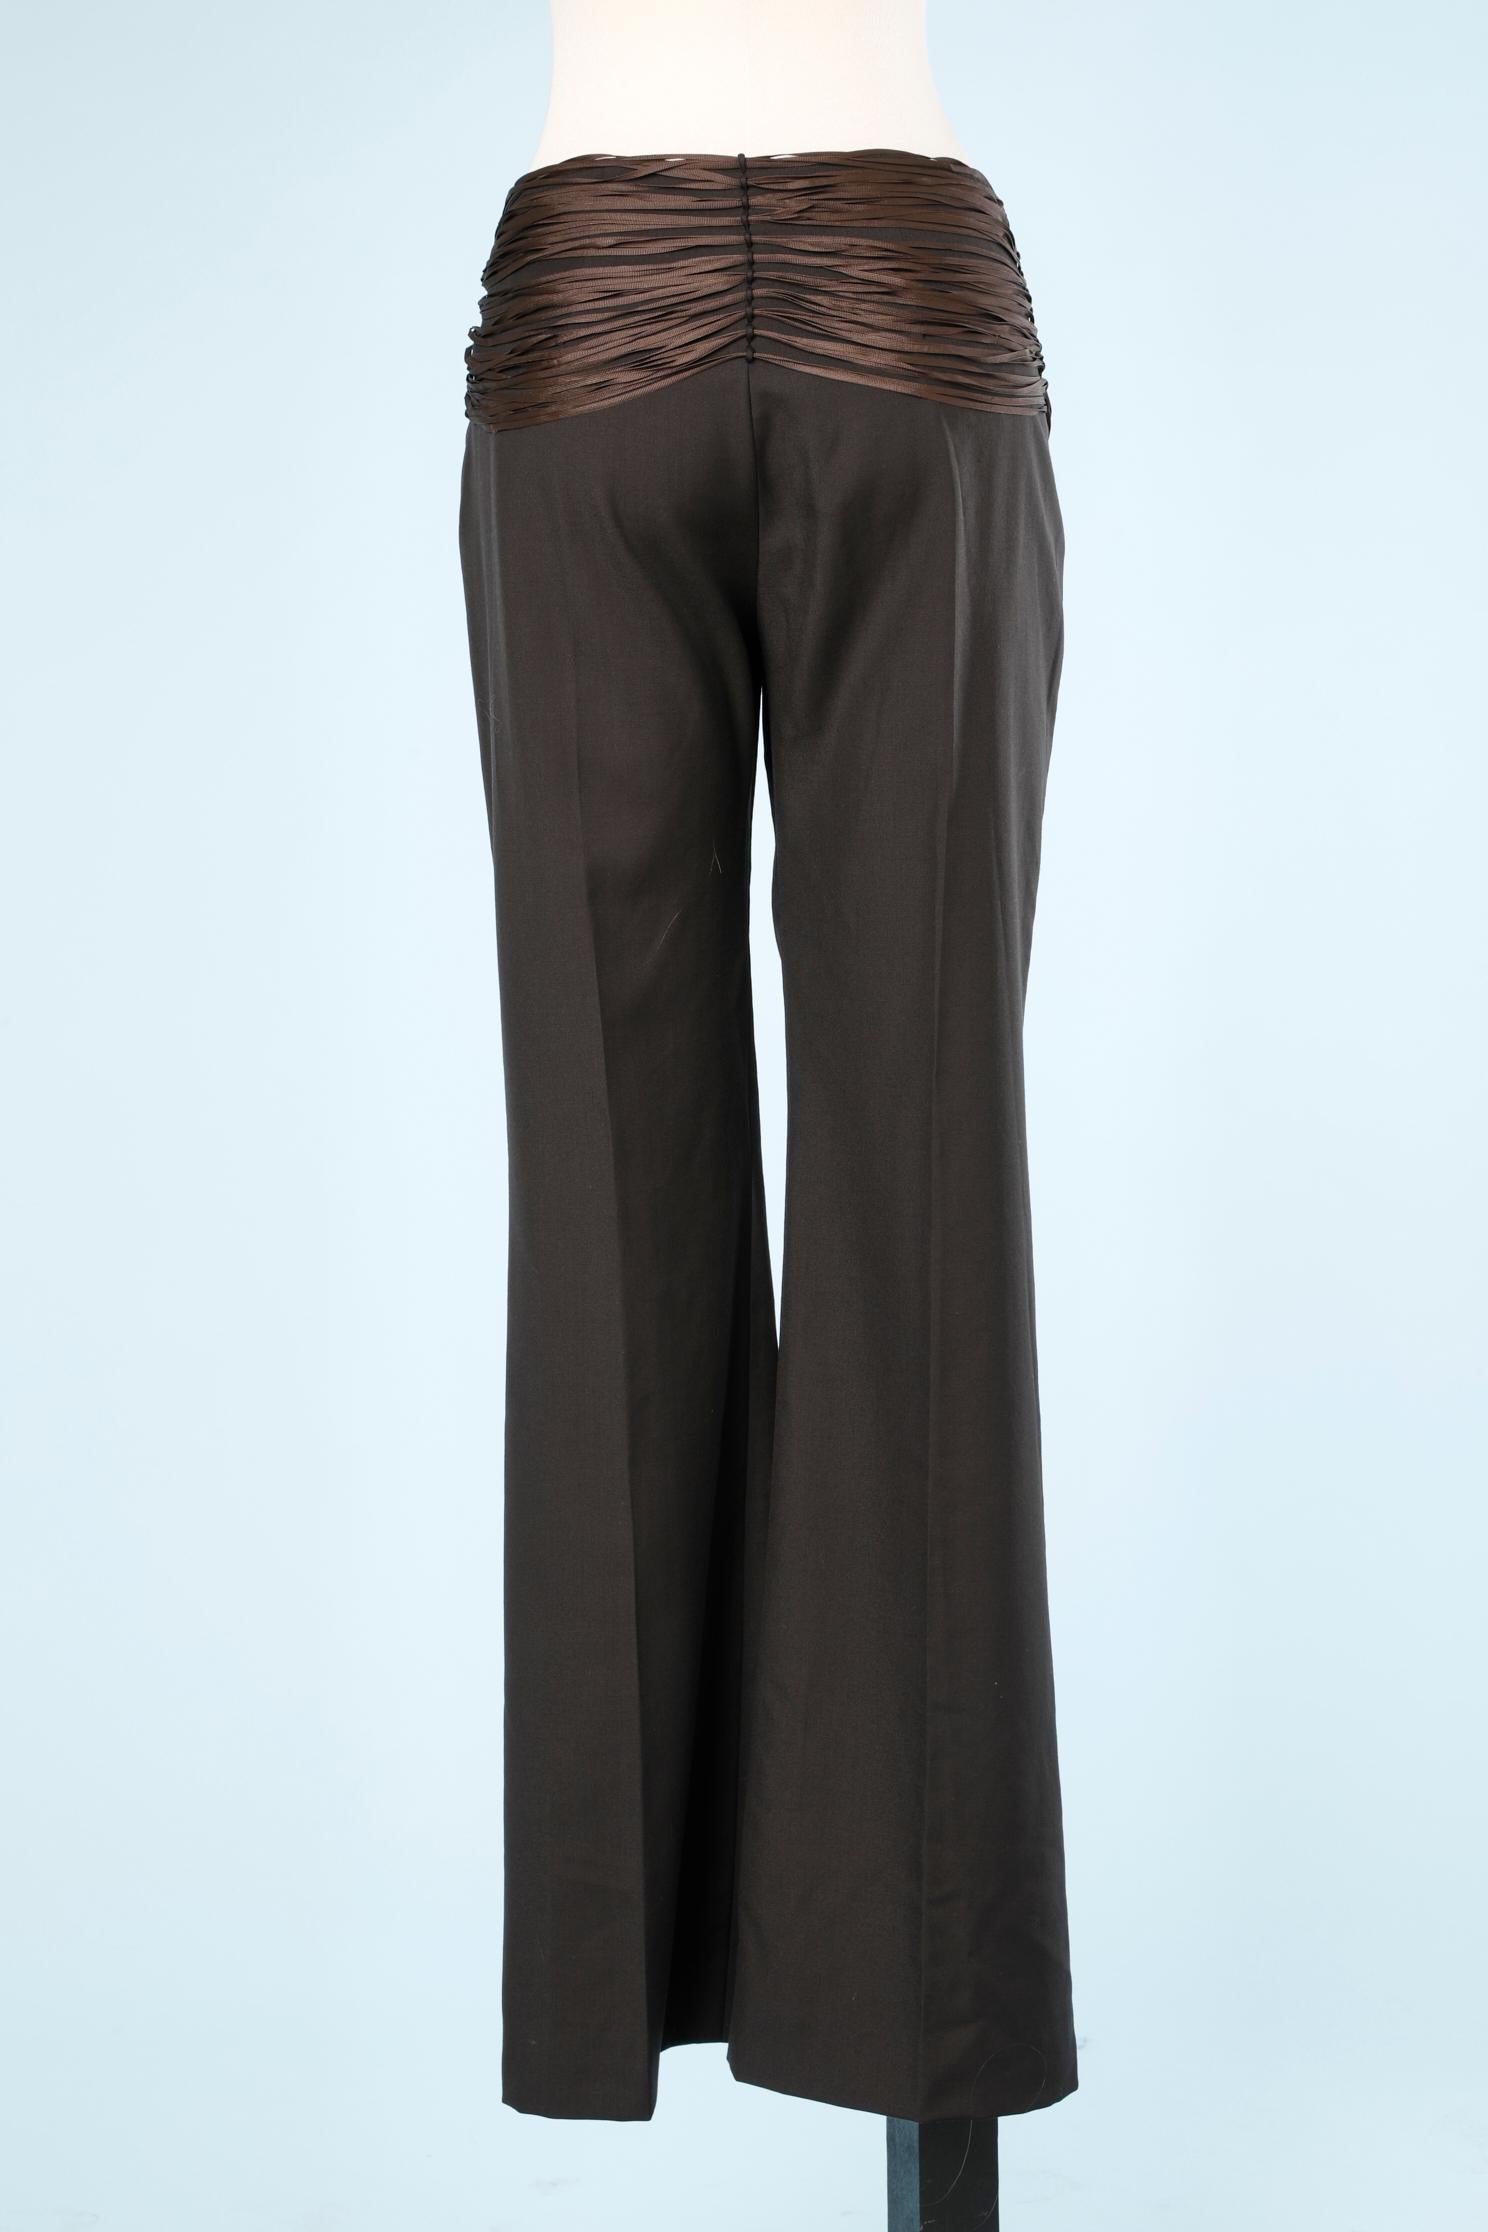 Black trouser with brown silk  fringes and Chinese belt Chloé  1